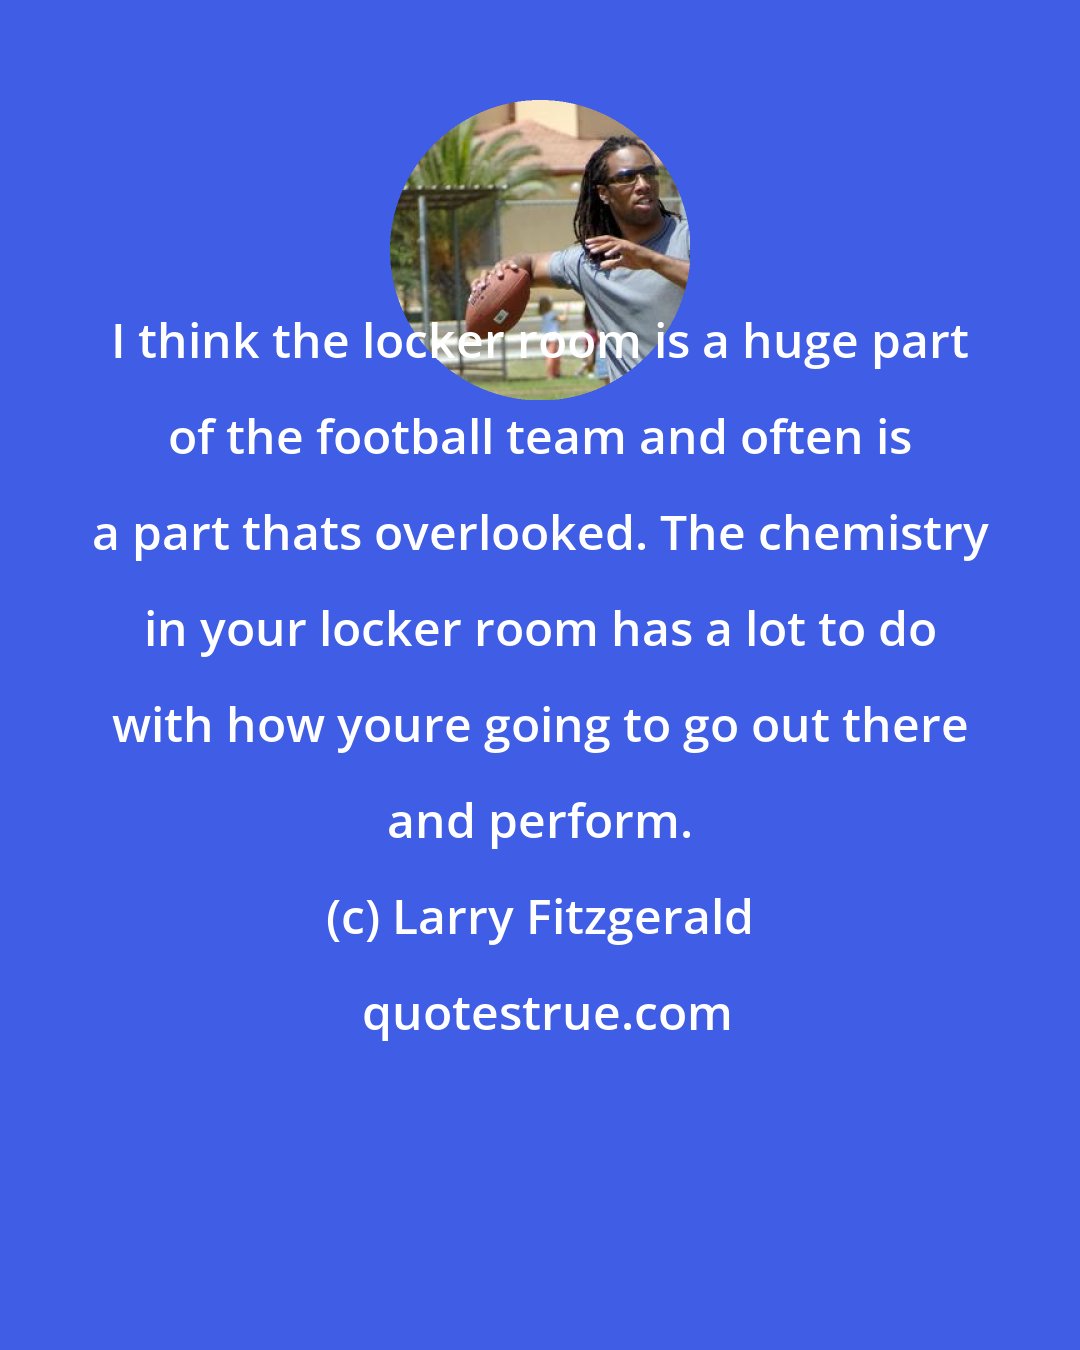 Larry Fitzgerald: I think the locker room is a huge part of the football team and often is a part thats overlooked. The chemistry in your locker room has a lot to do with how youre going to go out there and perform.